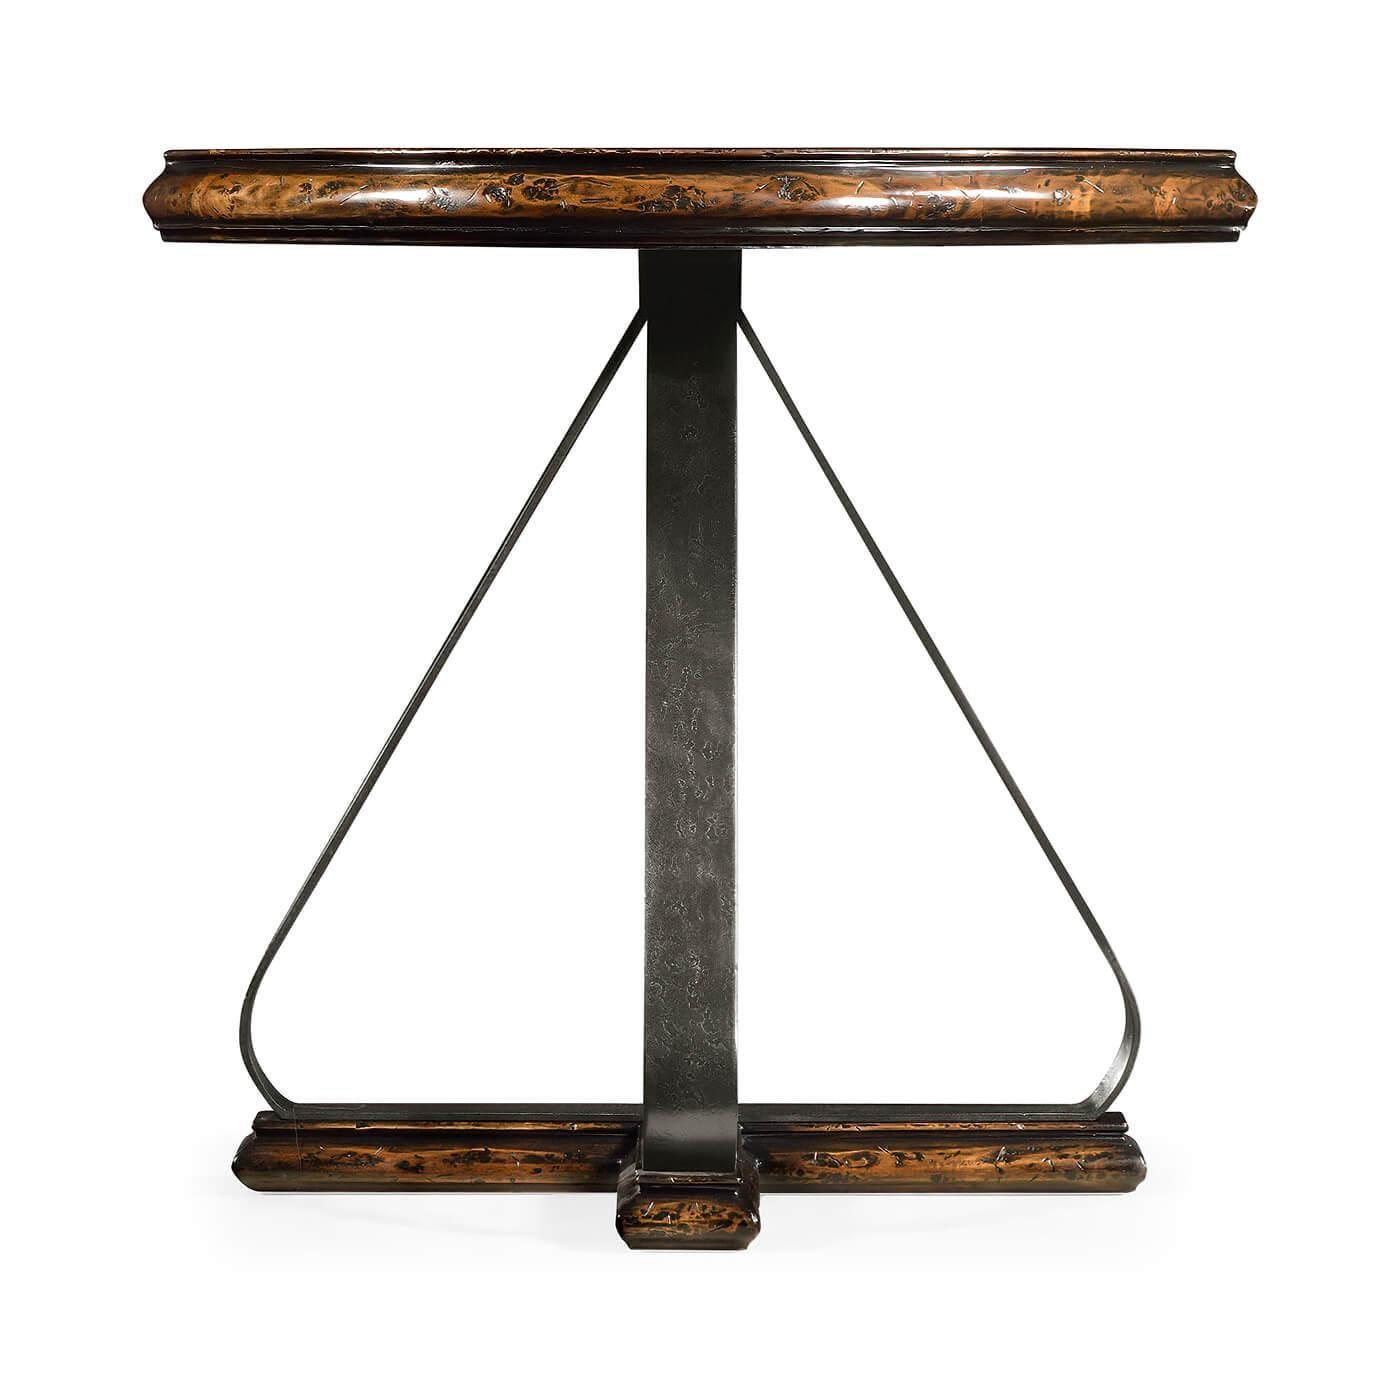 Rustic round side table with an antiqued rustic walnut planked top with a molded outside edge, standing on a curved iron 4 legged base.

Dimensions: 32